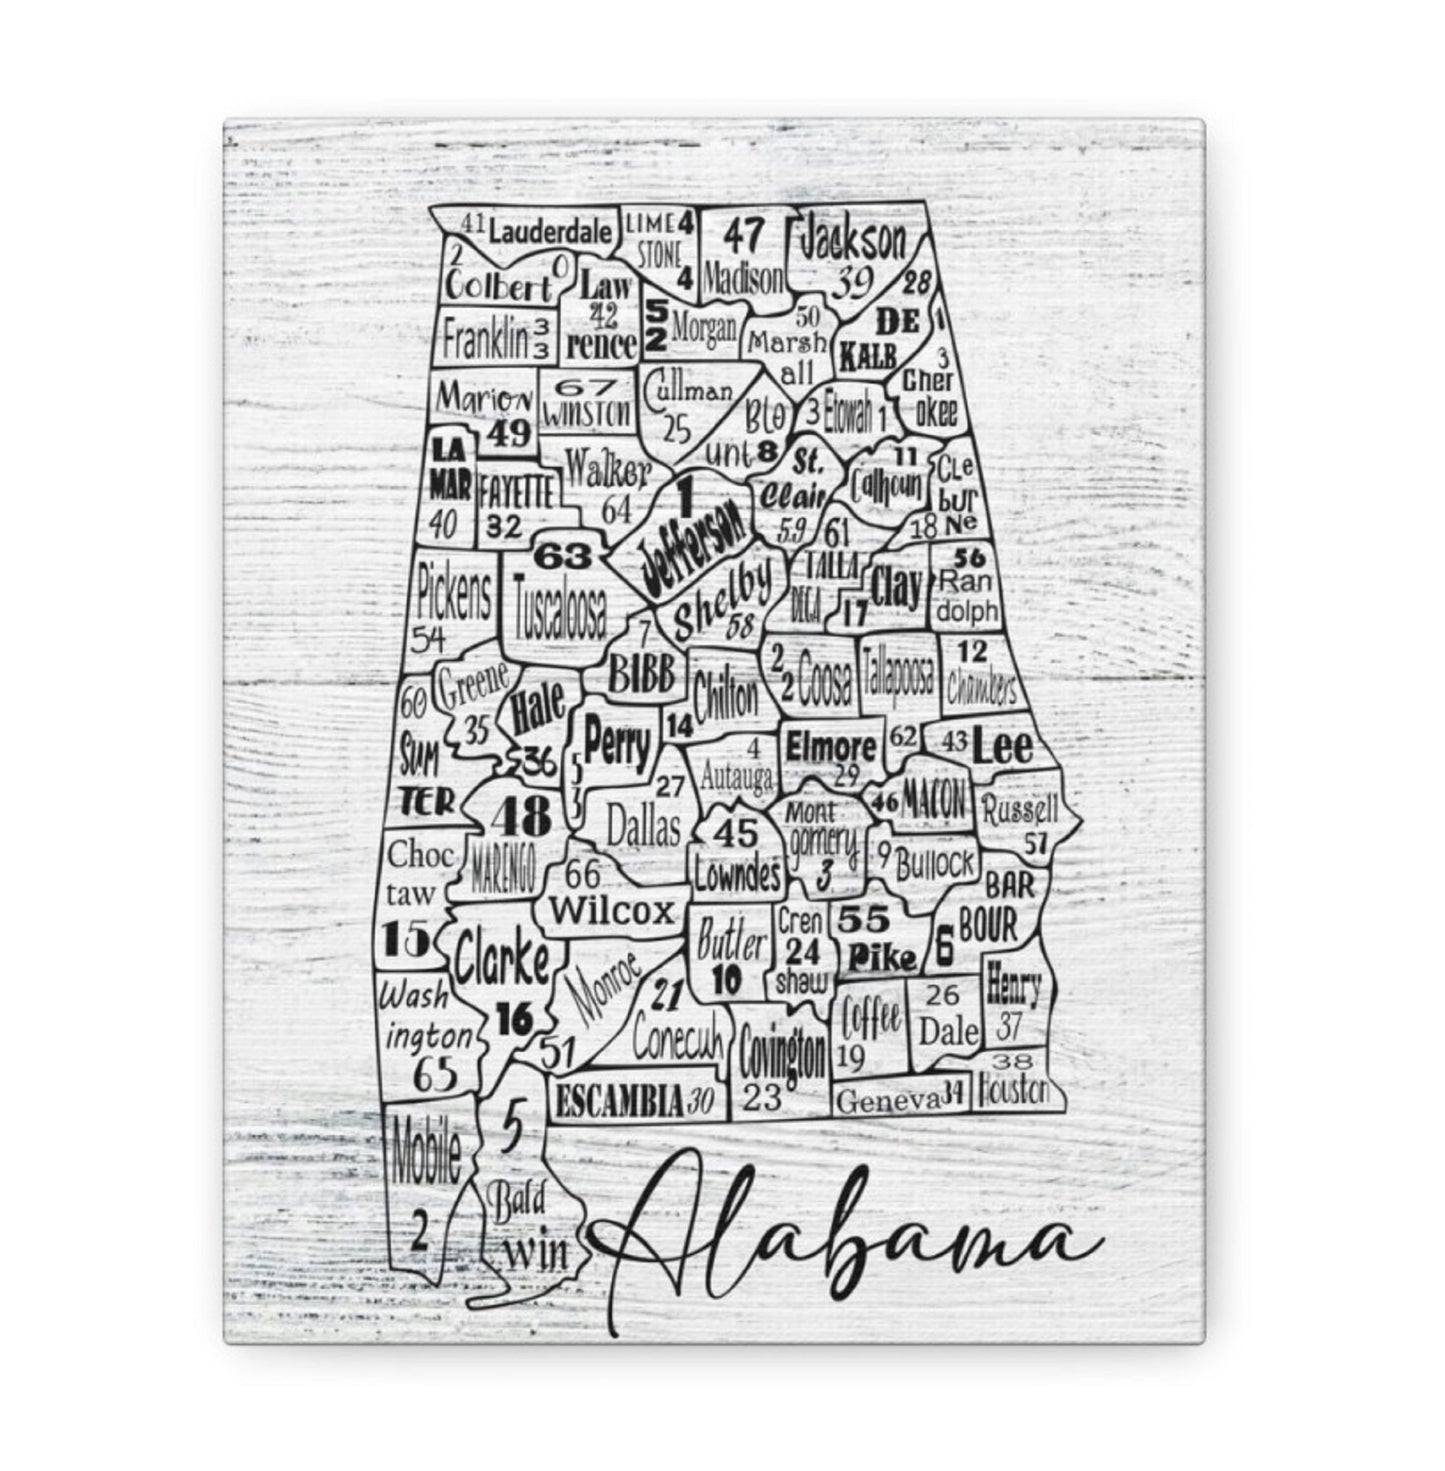 Alabama County License Plate Map Wrapped Canvas